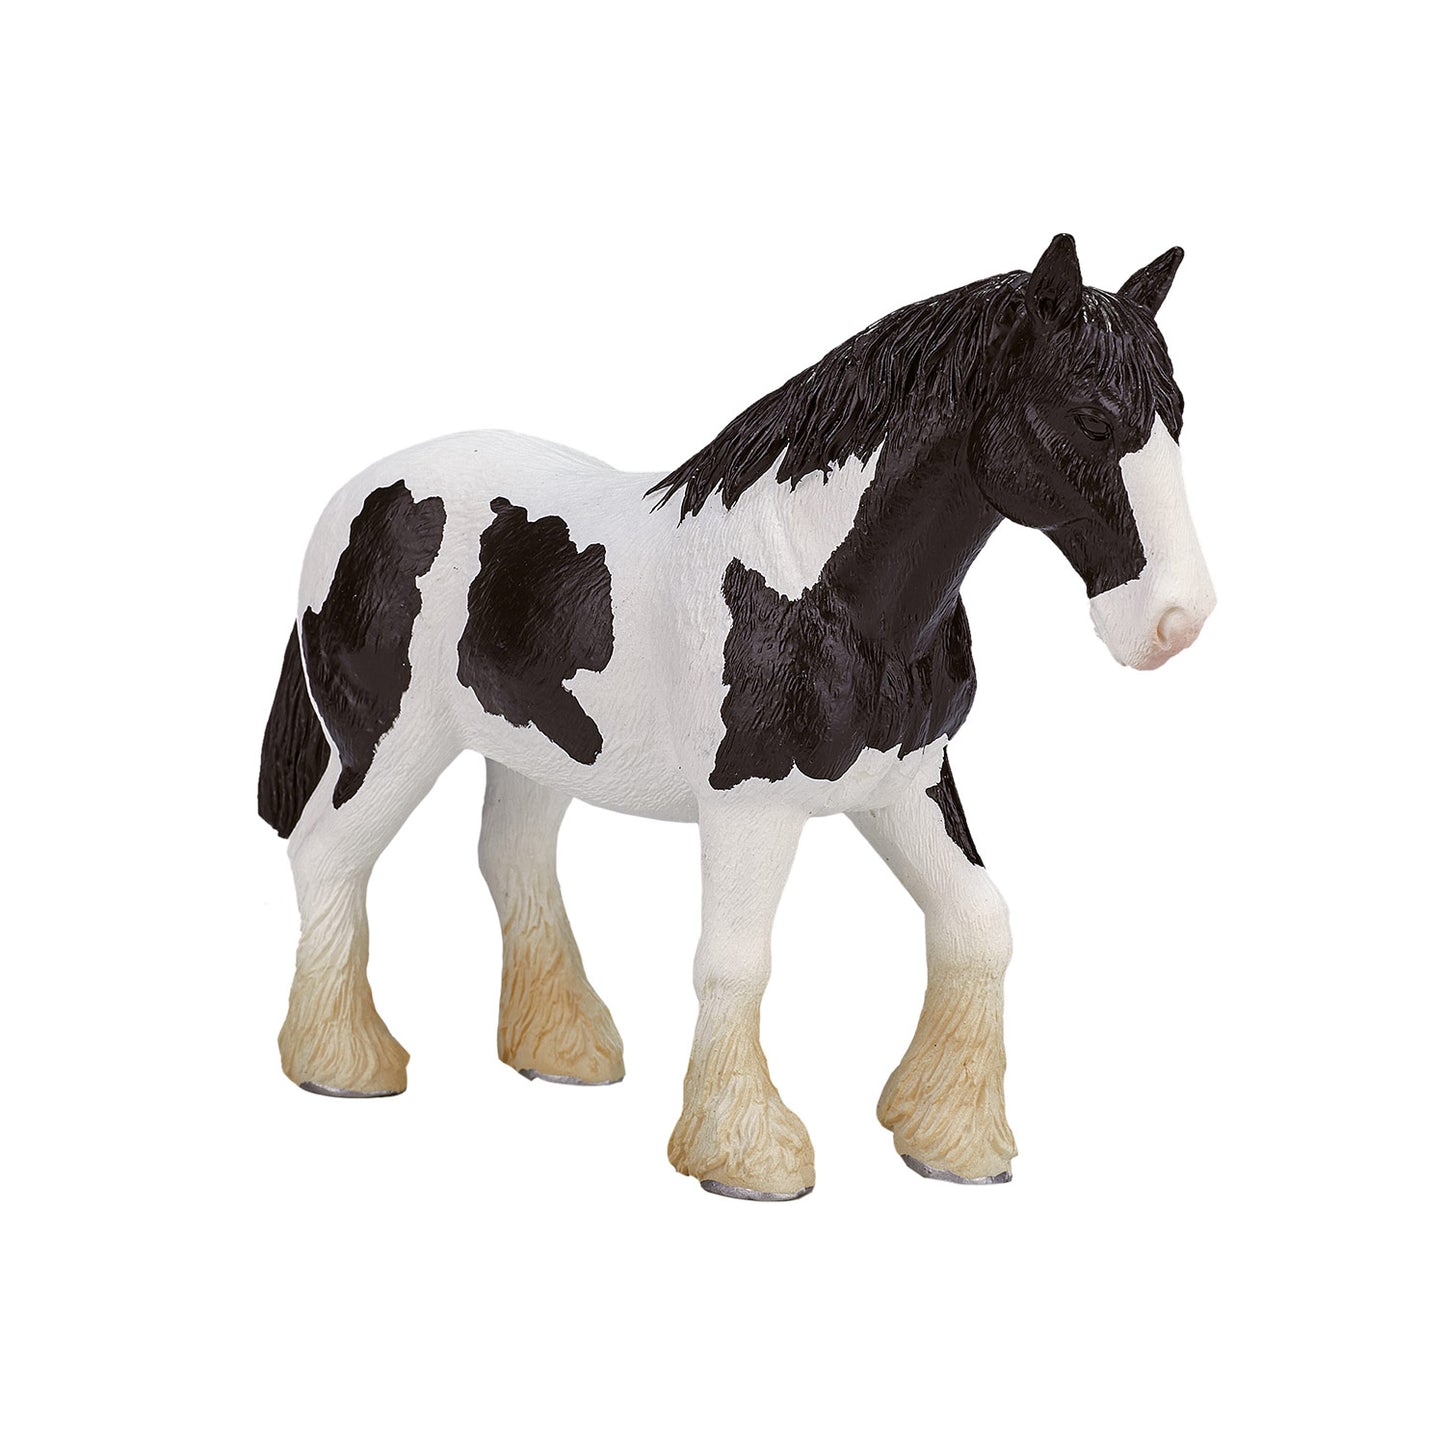 Mojo Horse World Clydesdale Horse Zwart-Wit 387085